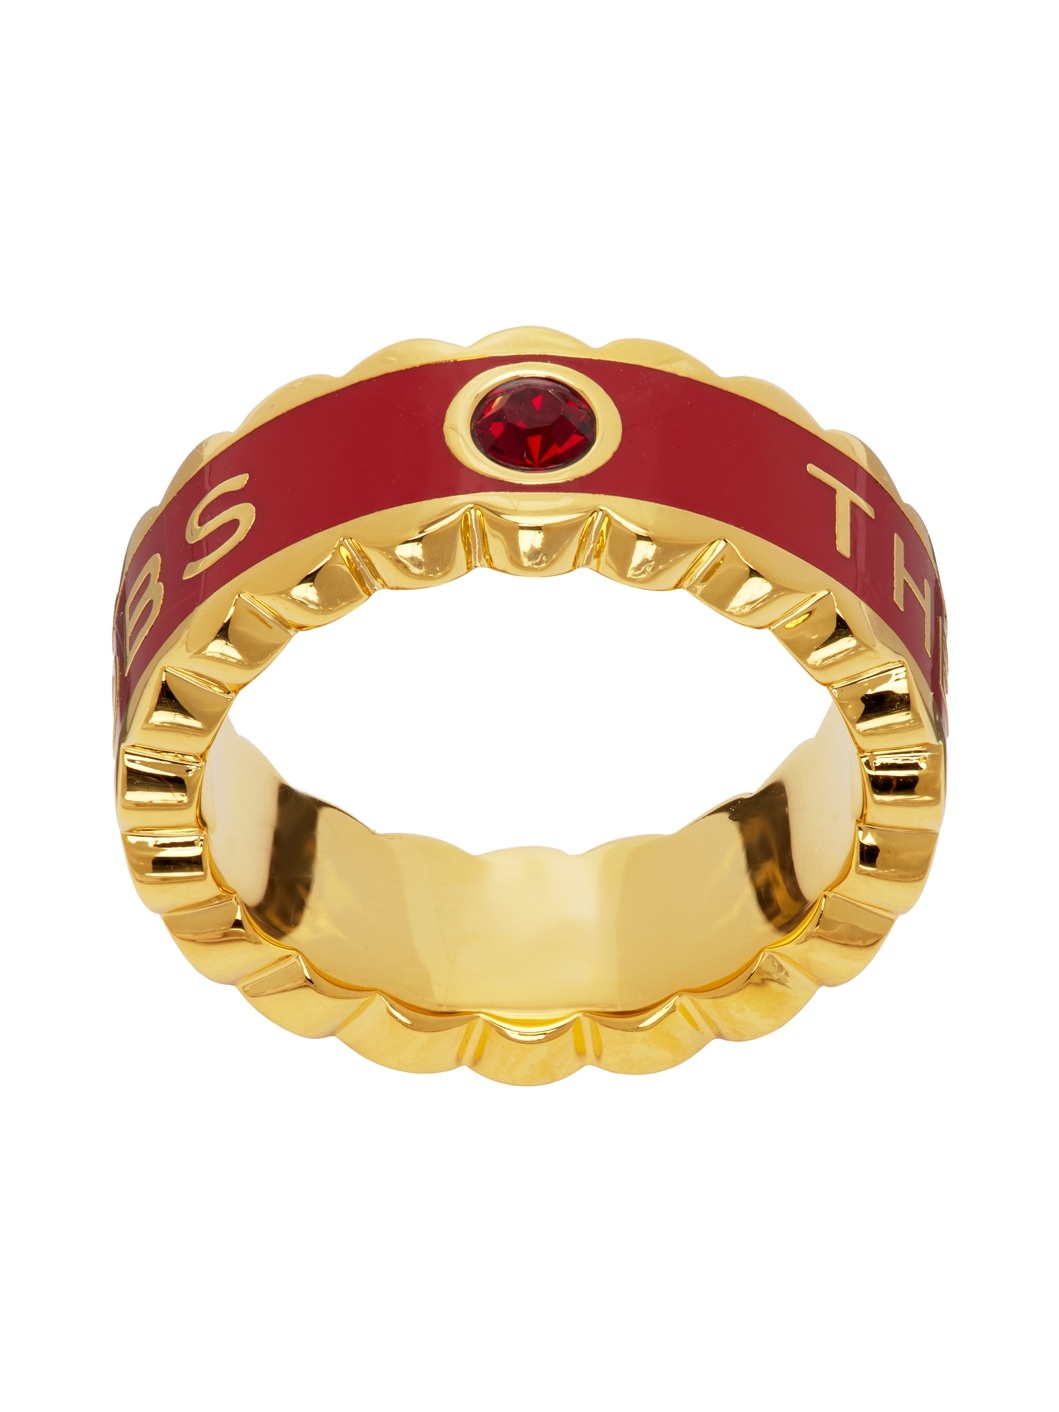 Gold & Red 'The Medallion' Ring - 1